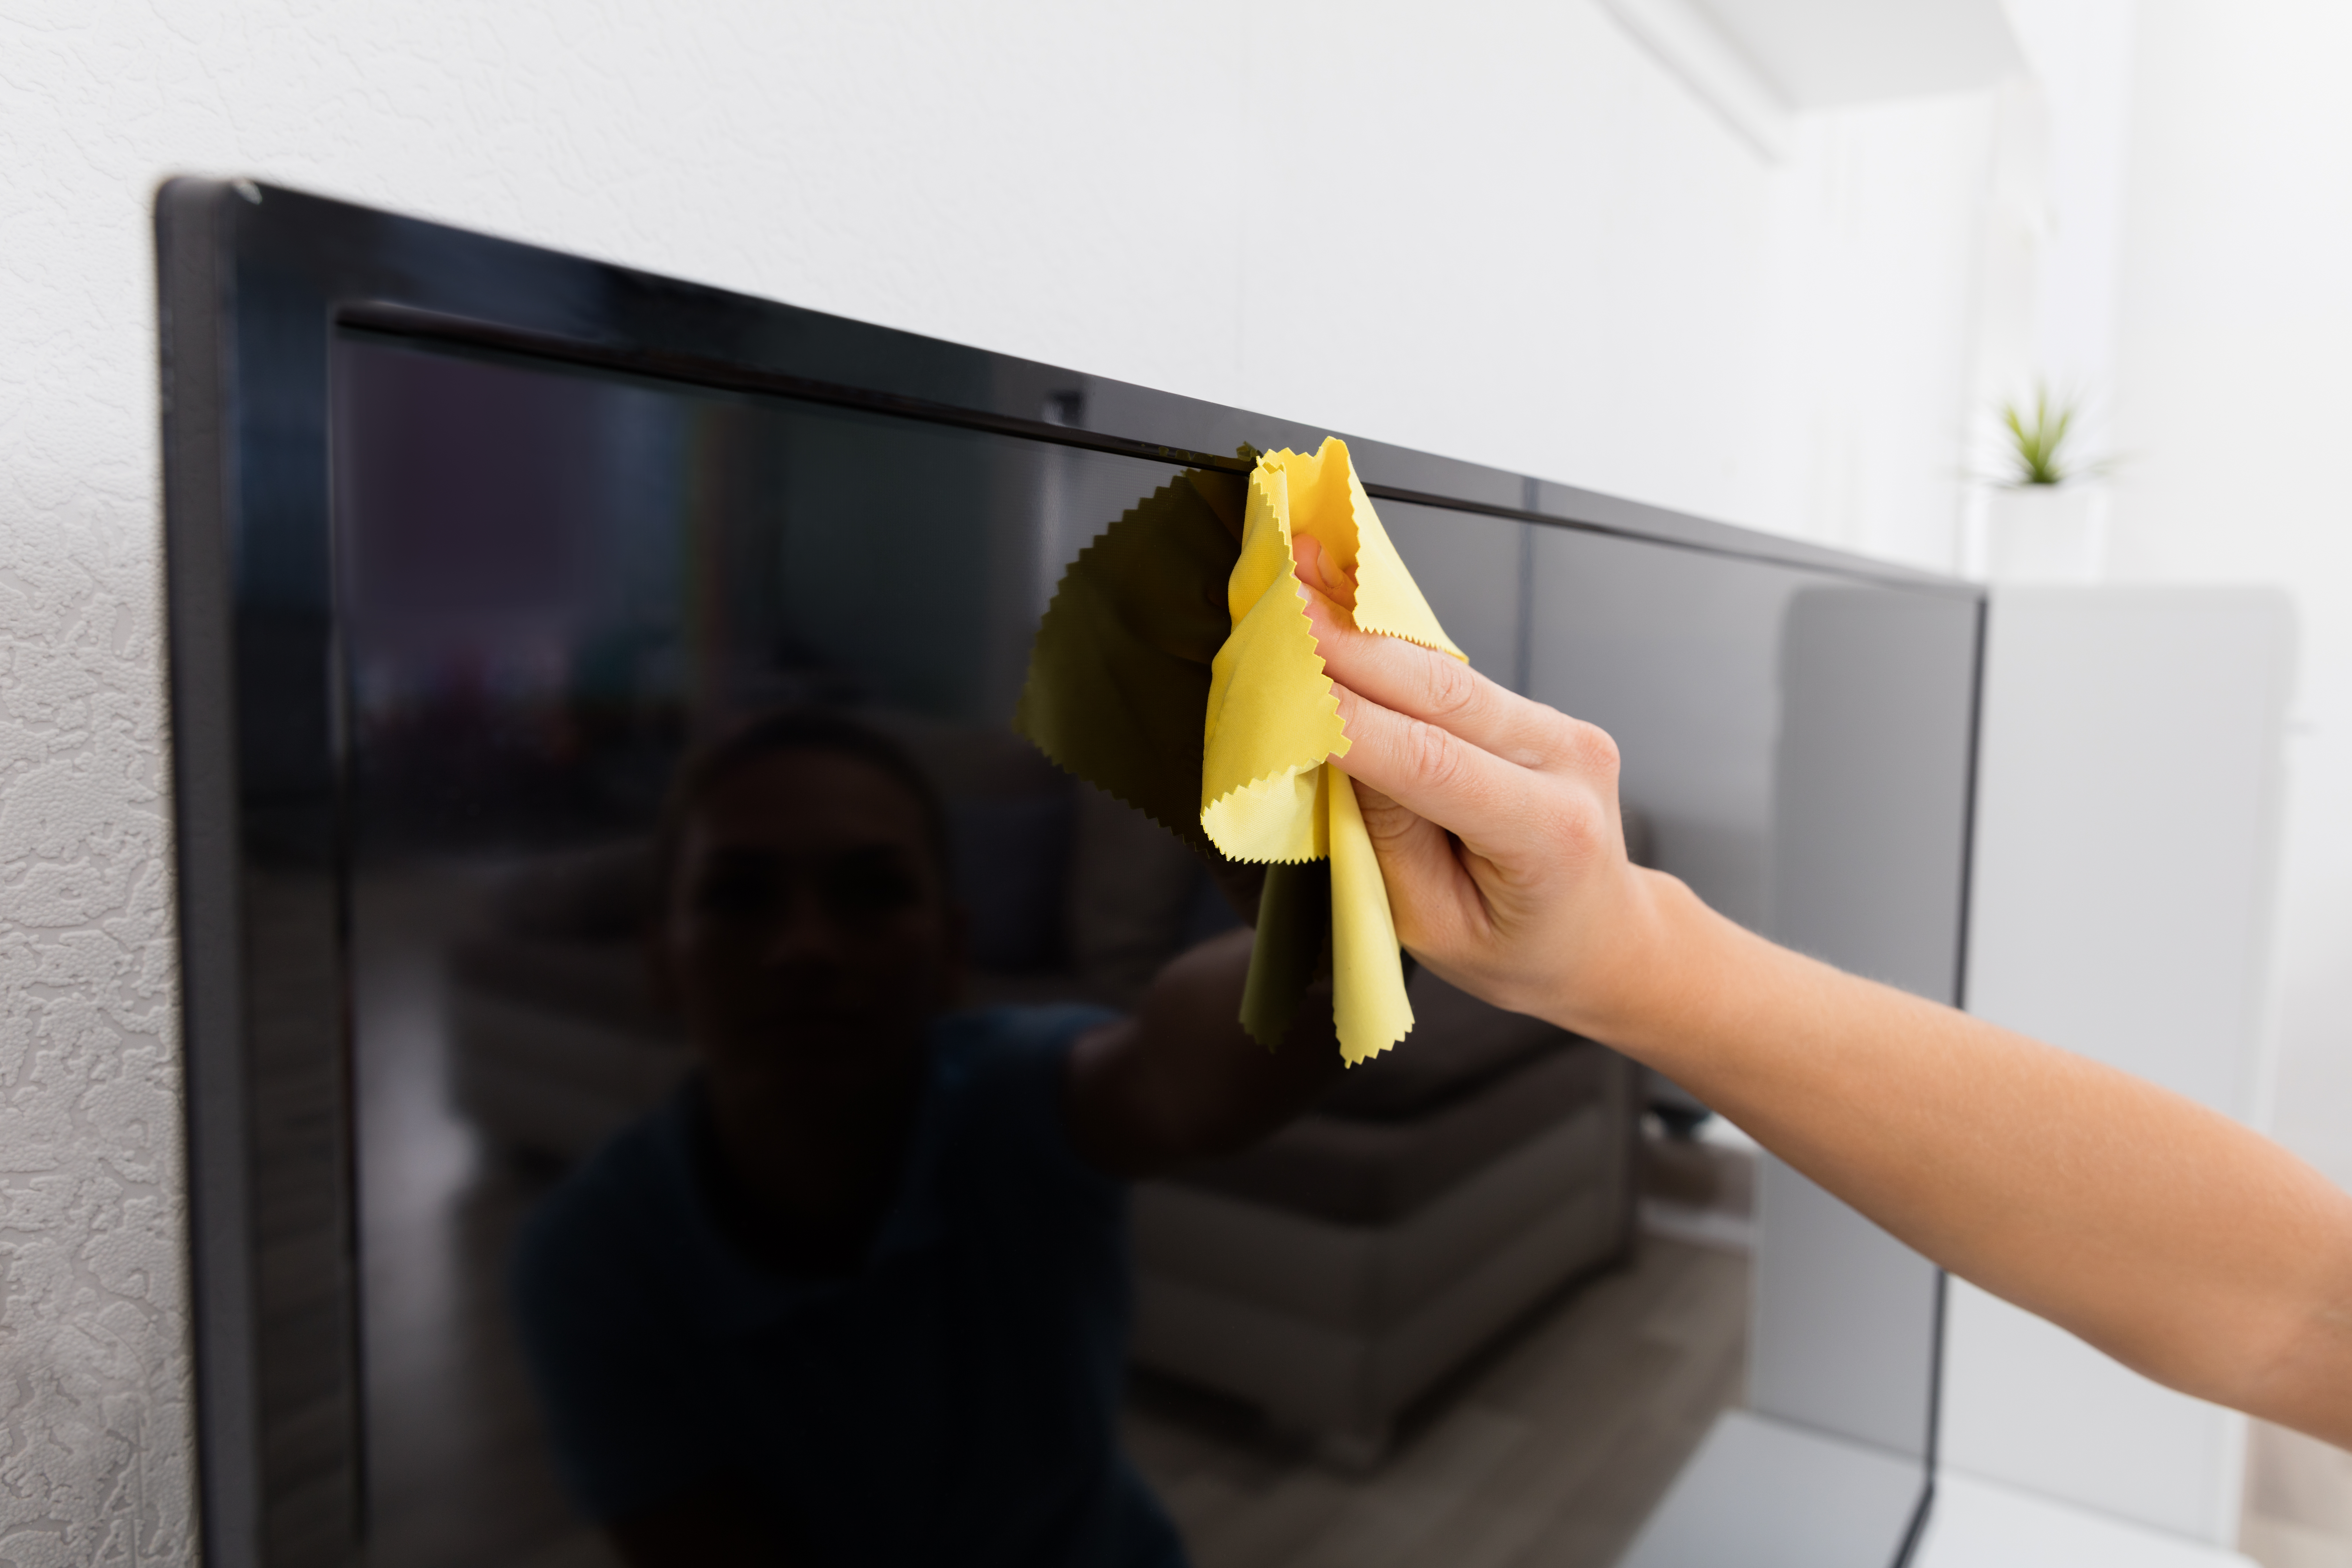 Can You Unmount a Tv by Yourself? 